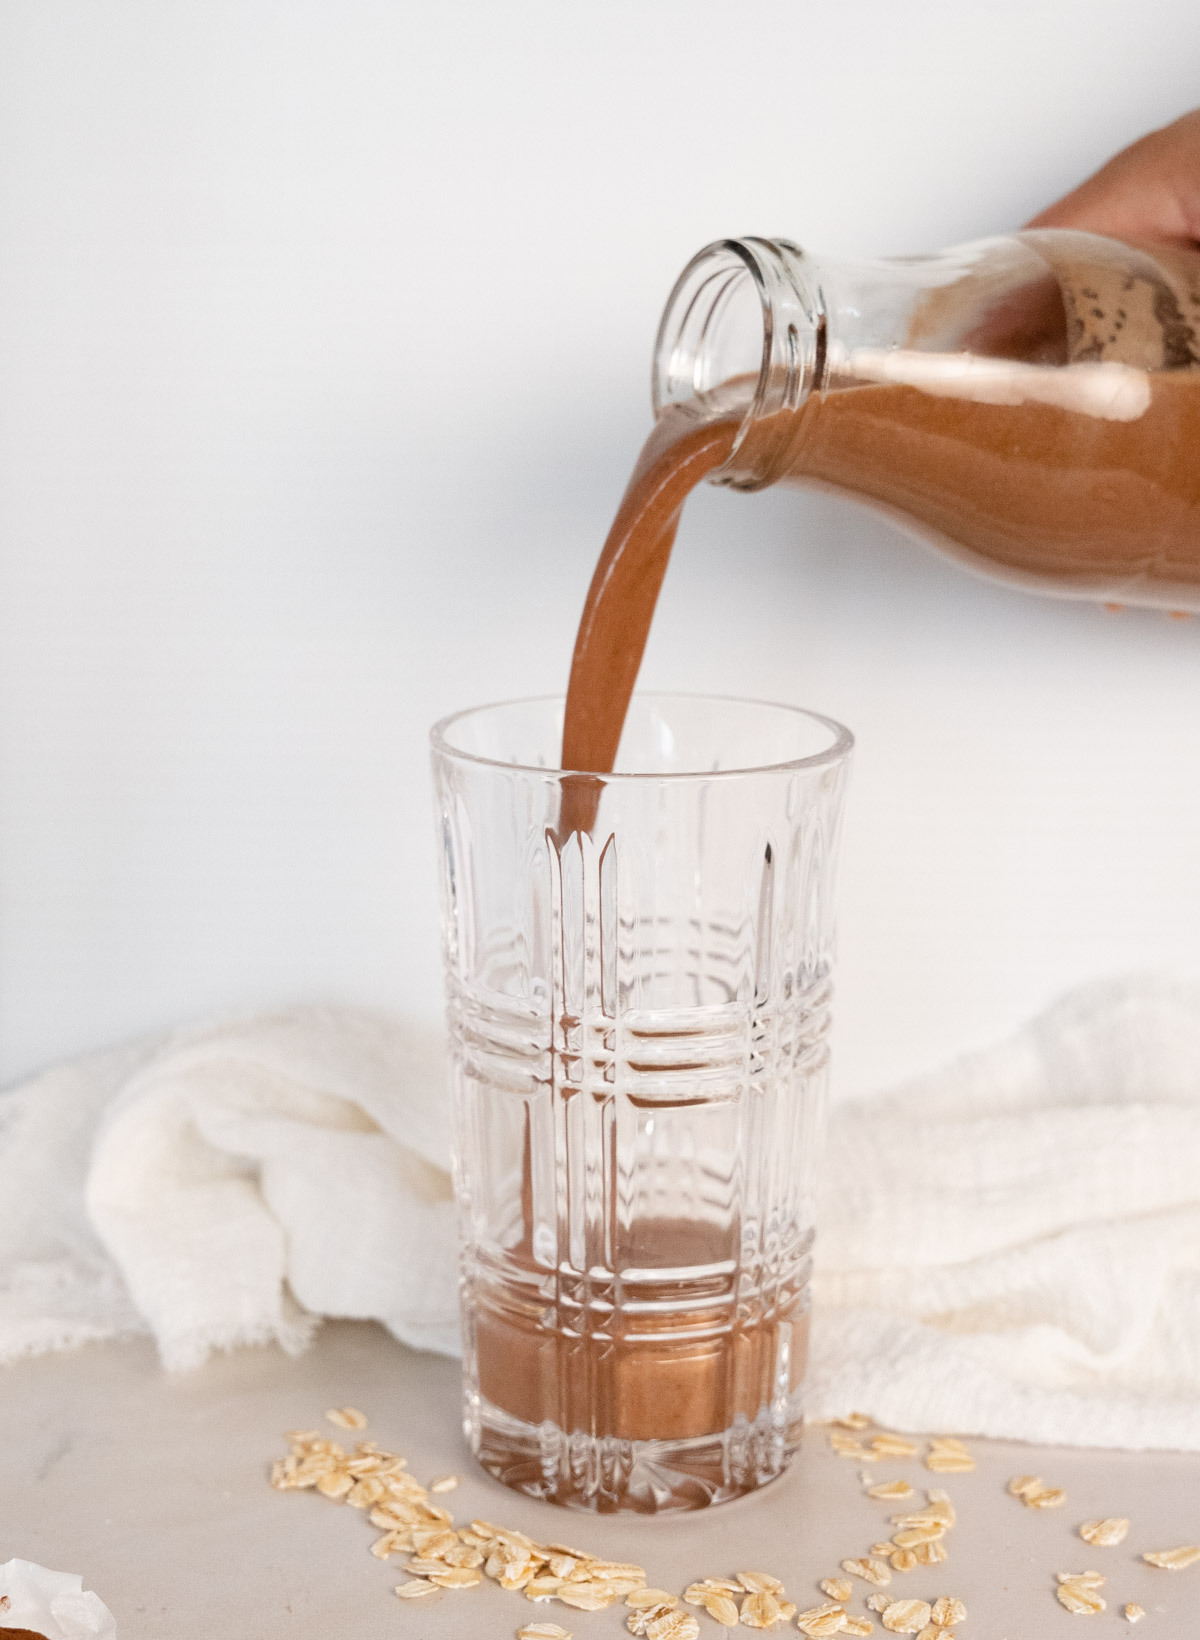 a bottle of cocoa oat milk being poured into a glass